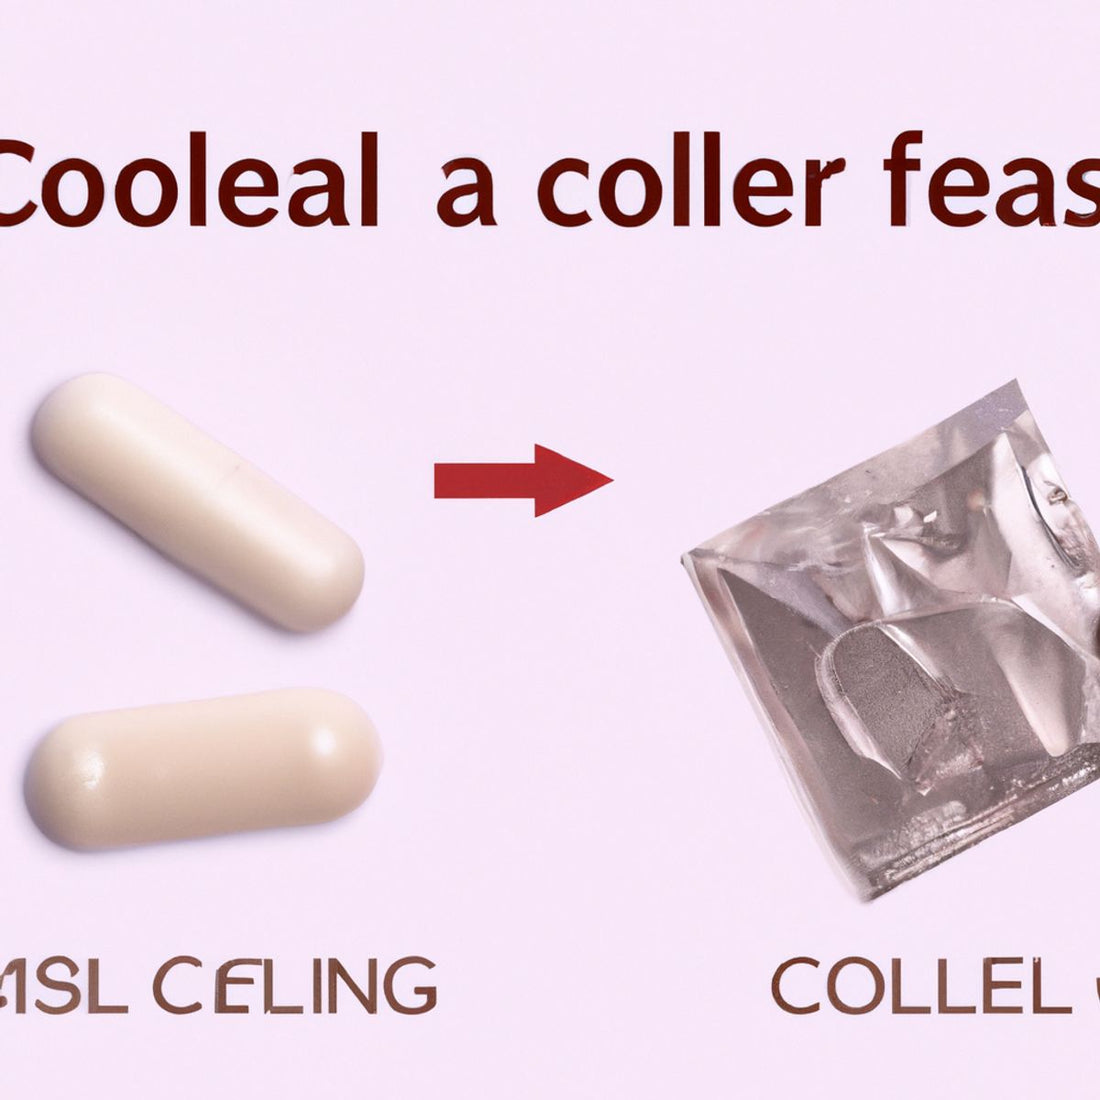 Choosing Between Collagen Formats: Powder vs. Capsules Compared